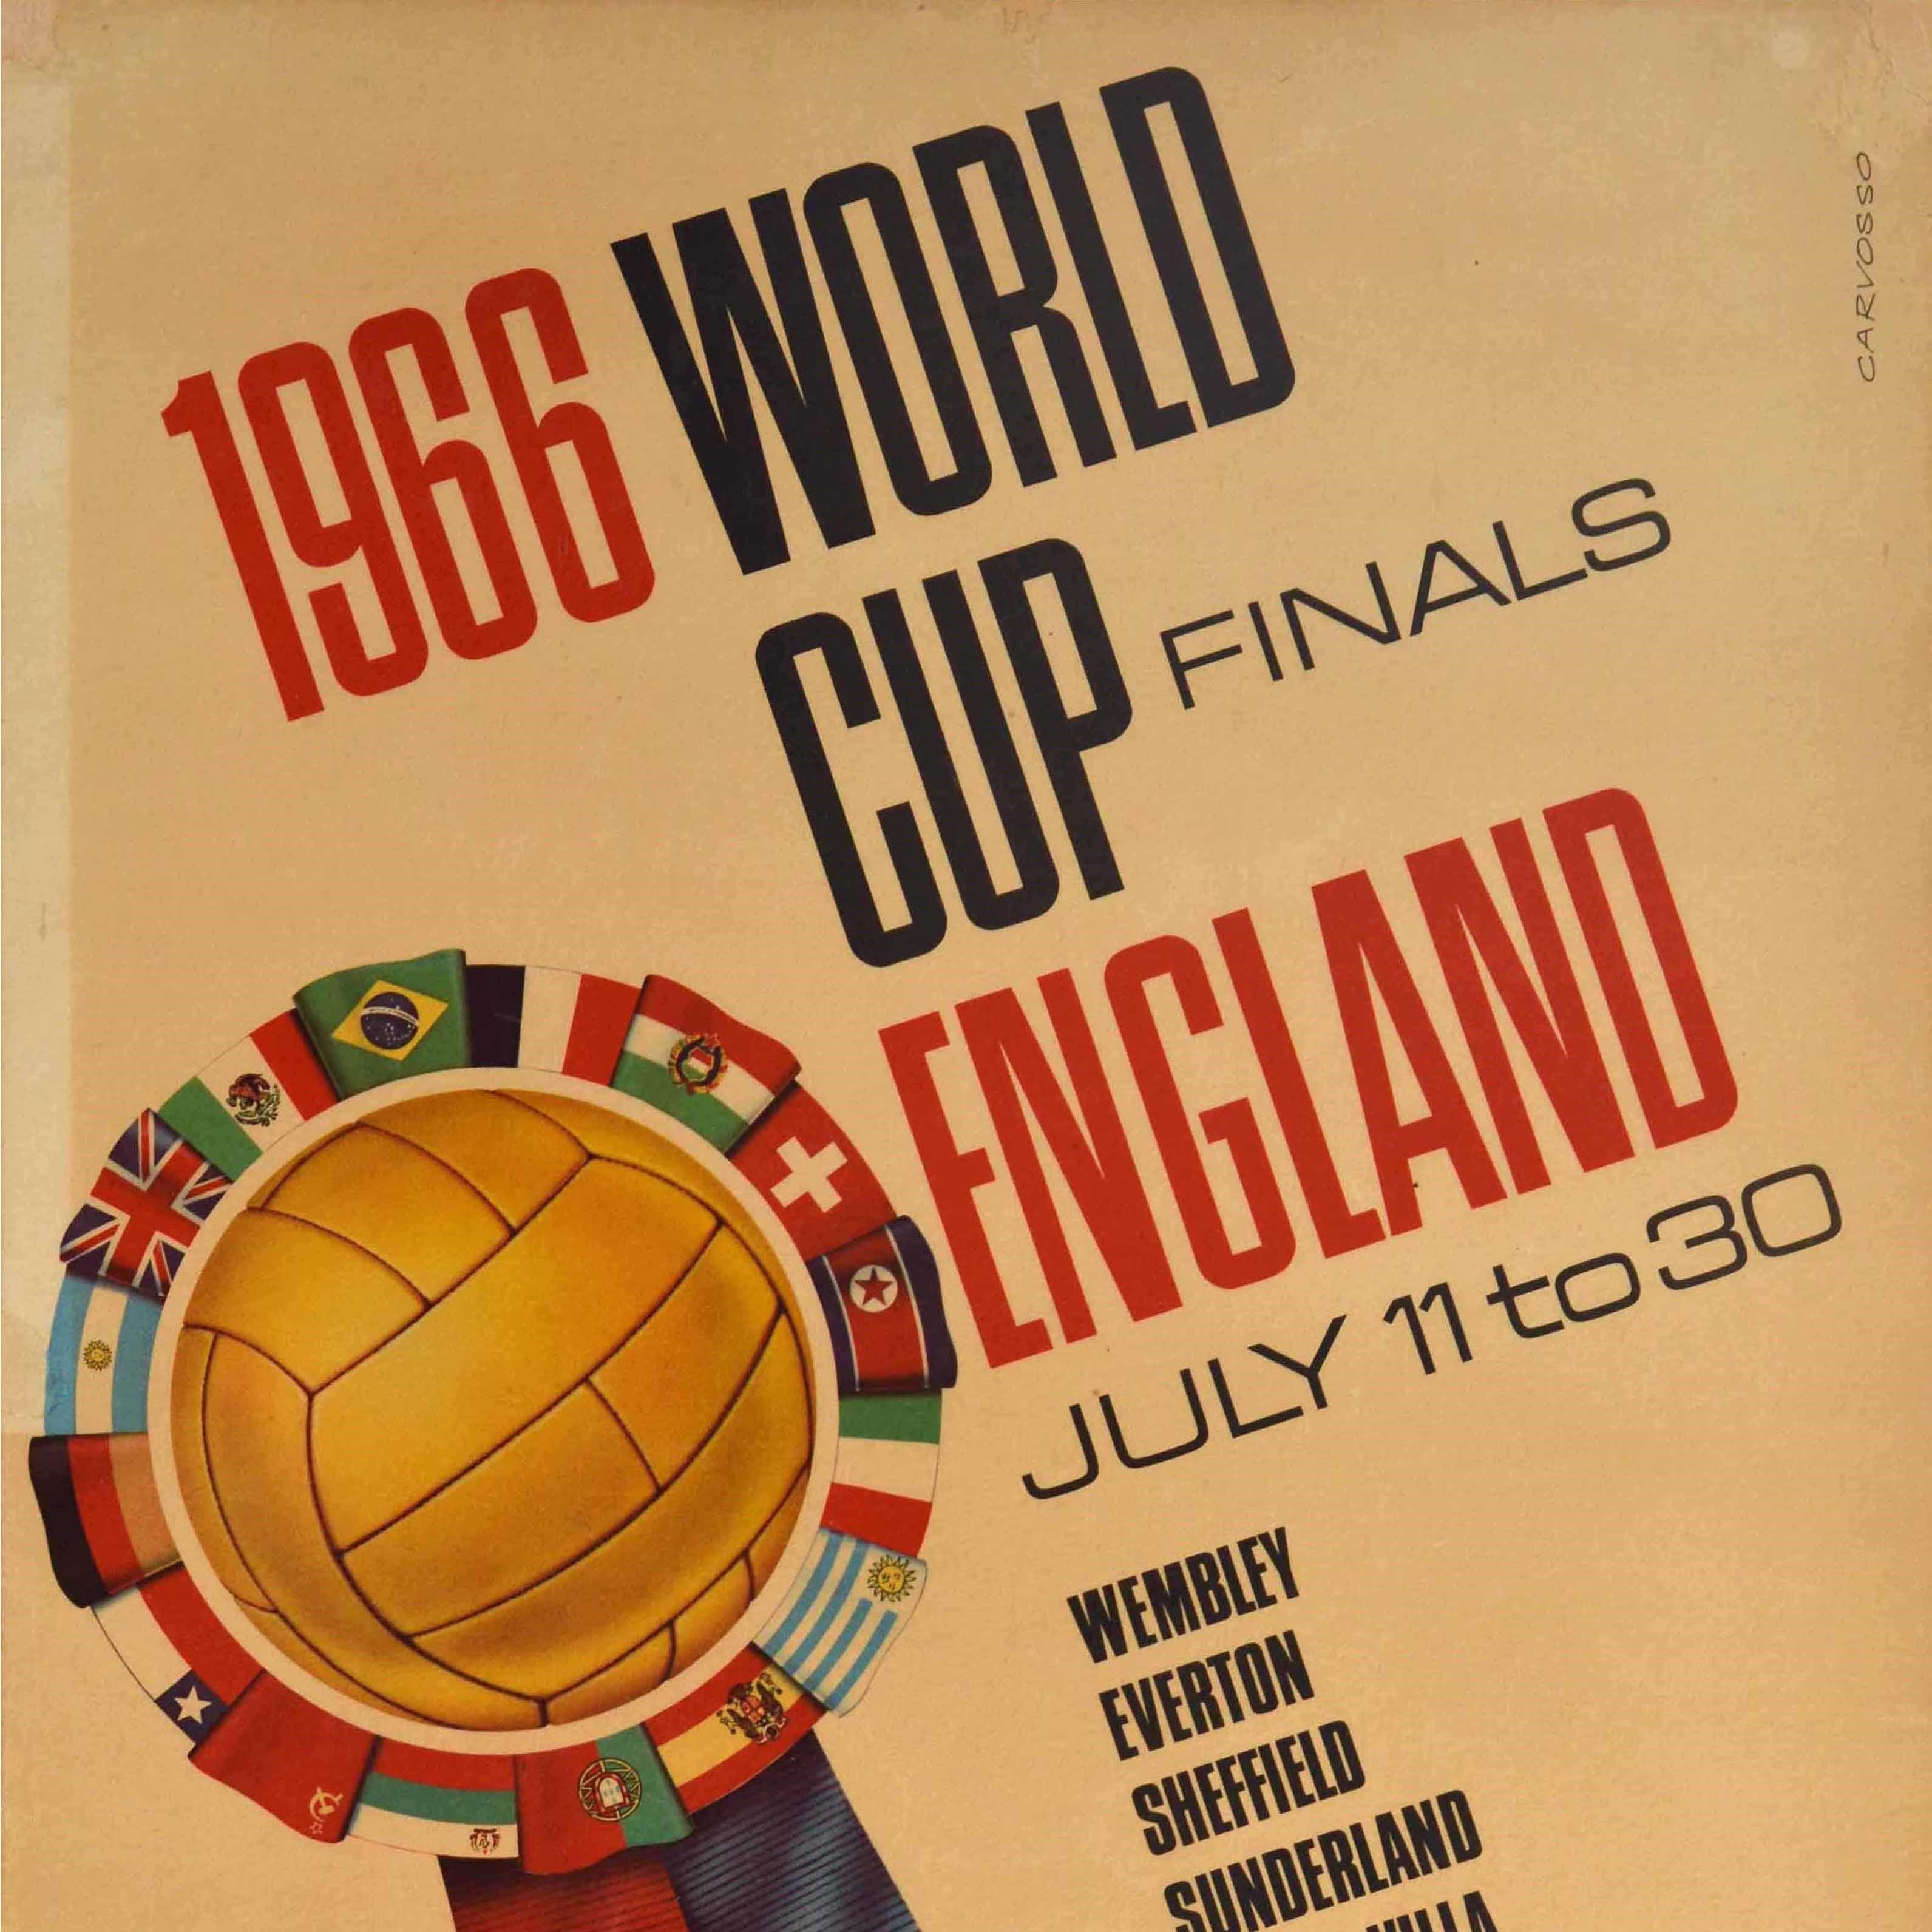 Original Vintage Sport Poster 1966 World Cup Finals England Football Wembley - Print by Carvosso